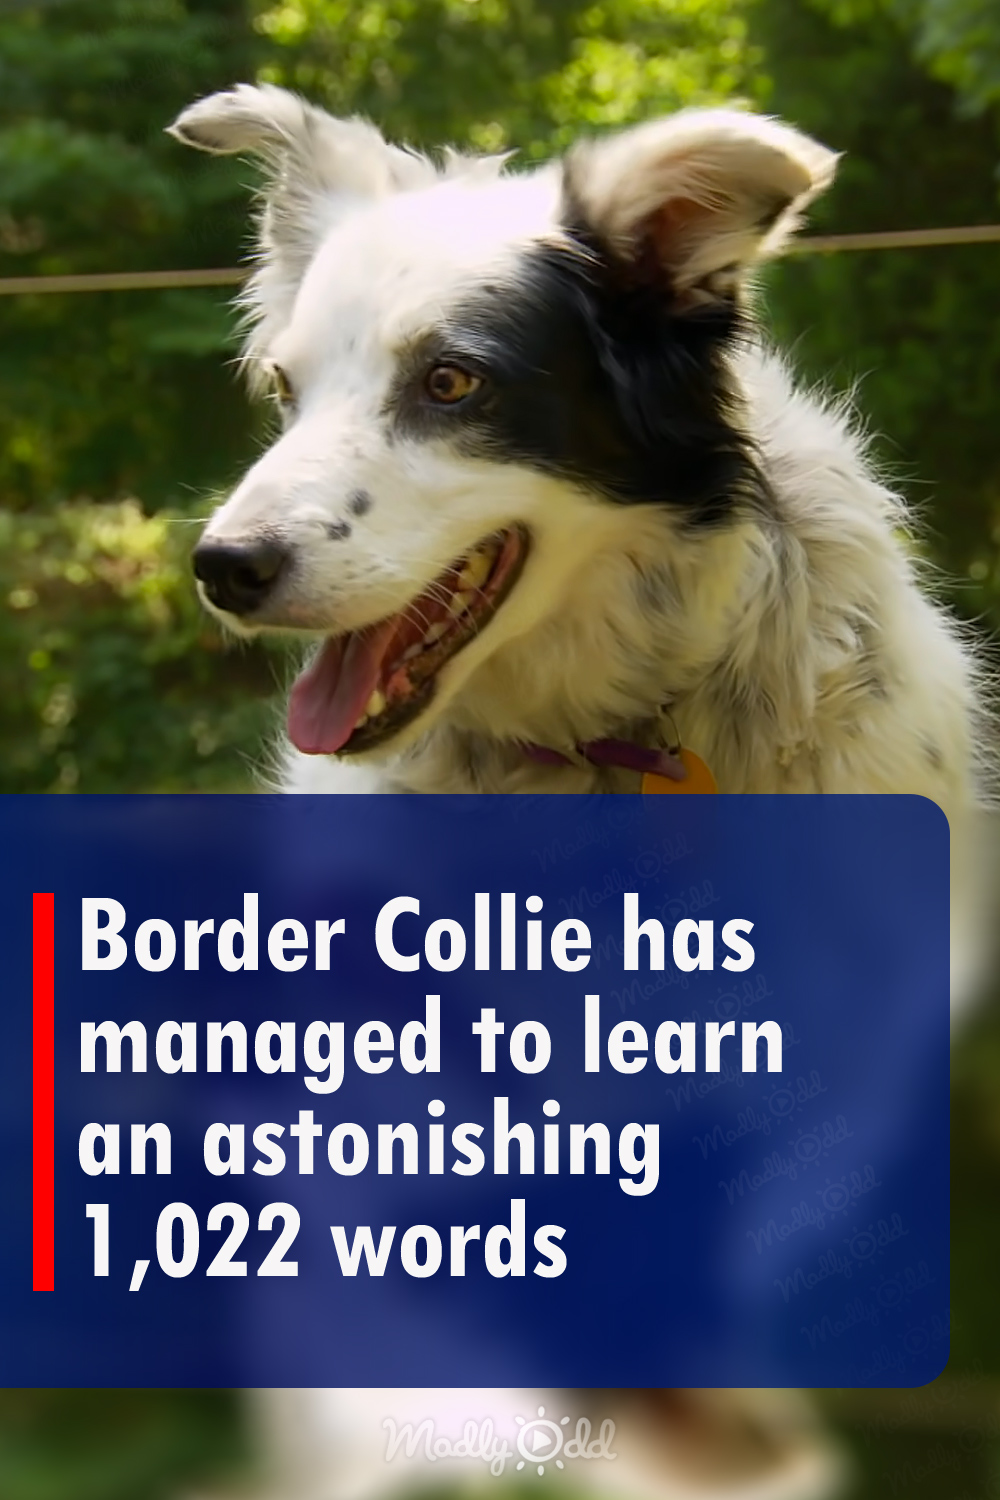 Border Collie has managed to learn an astonishing 1,022 words